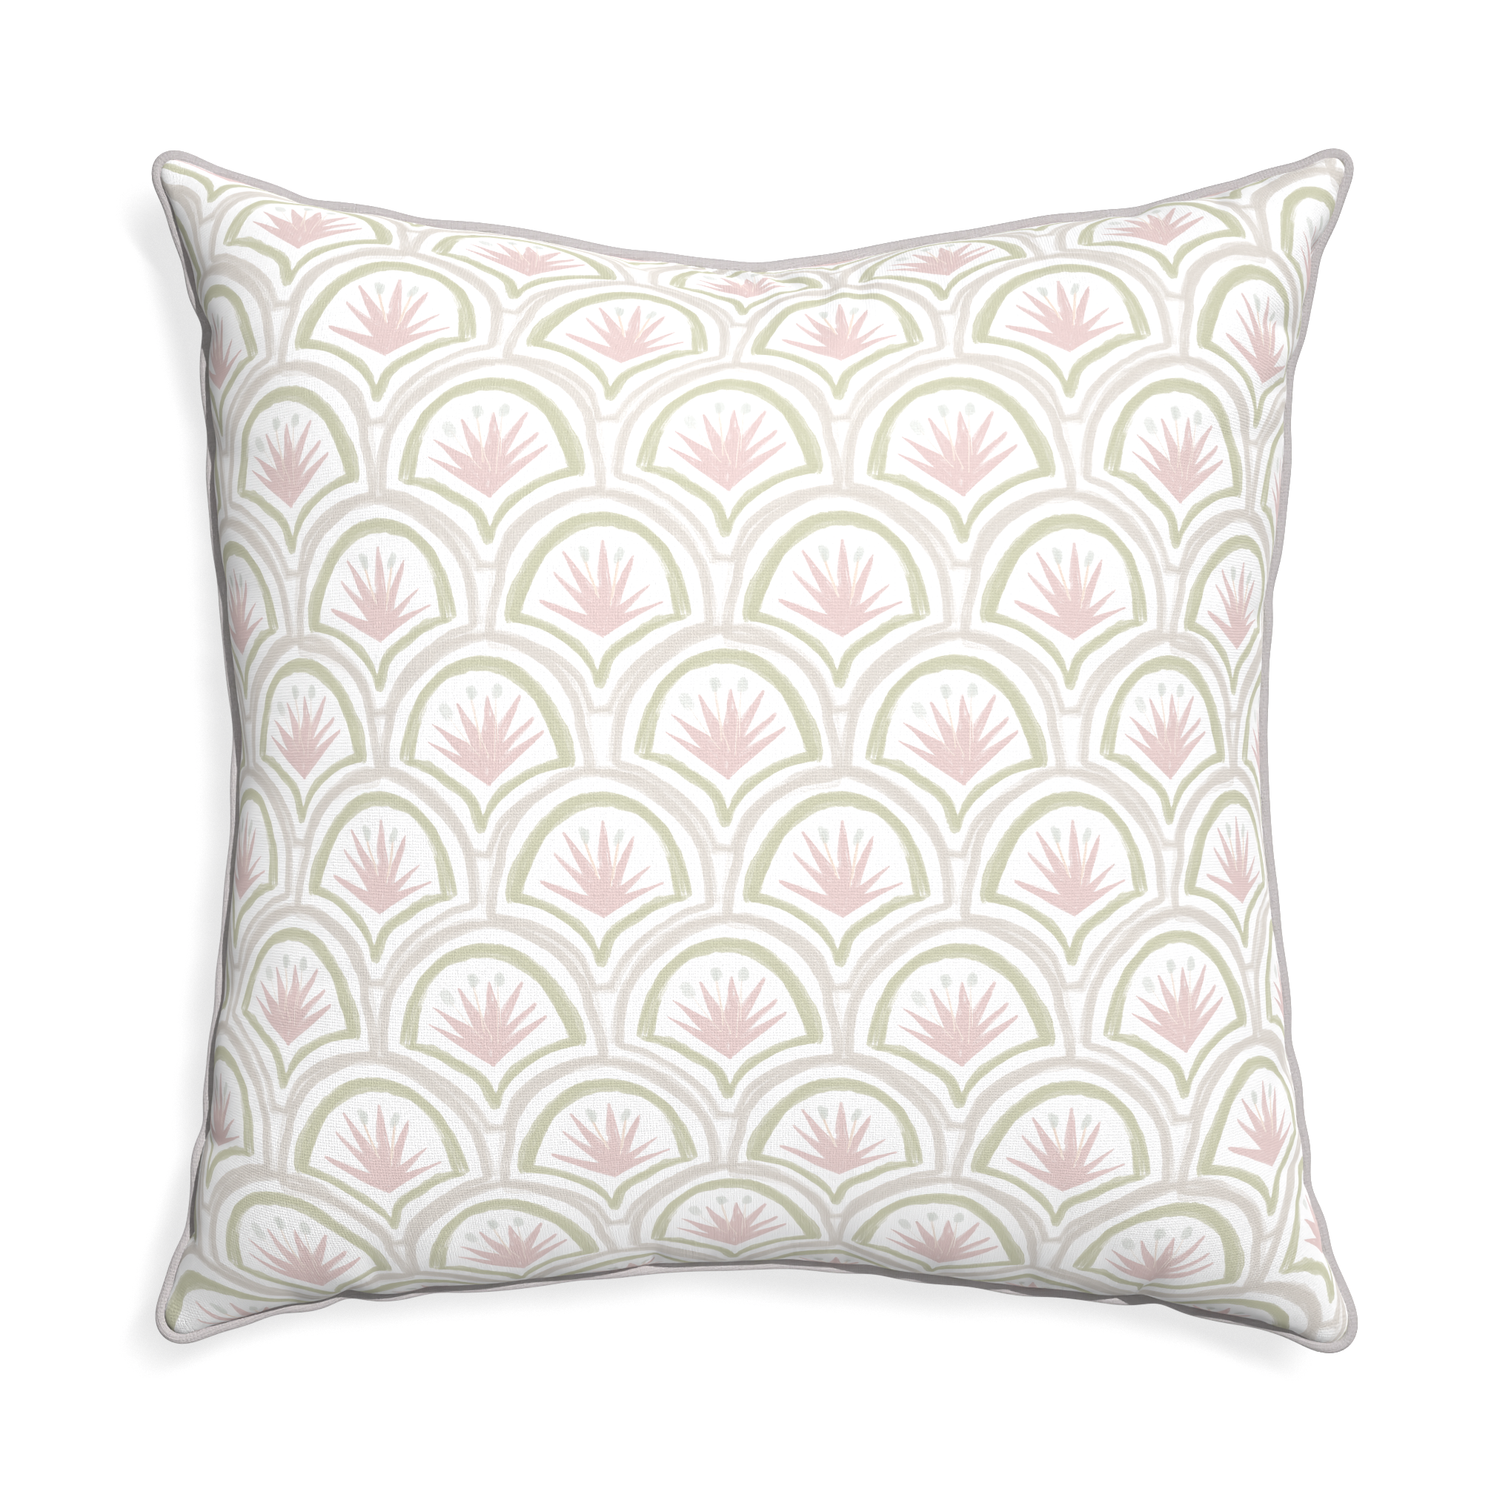 Euro-sham thatcher rose custom pillow with pebble piping on white background